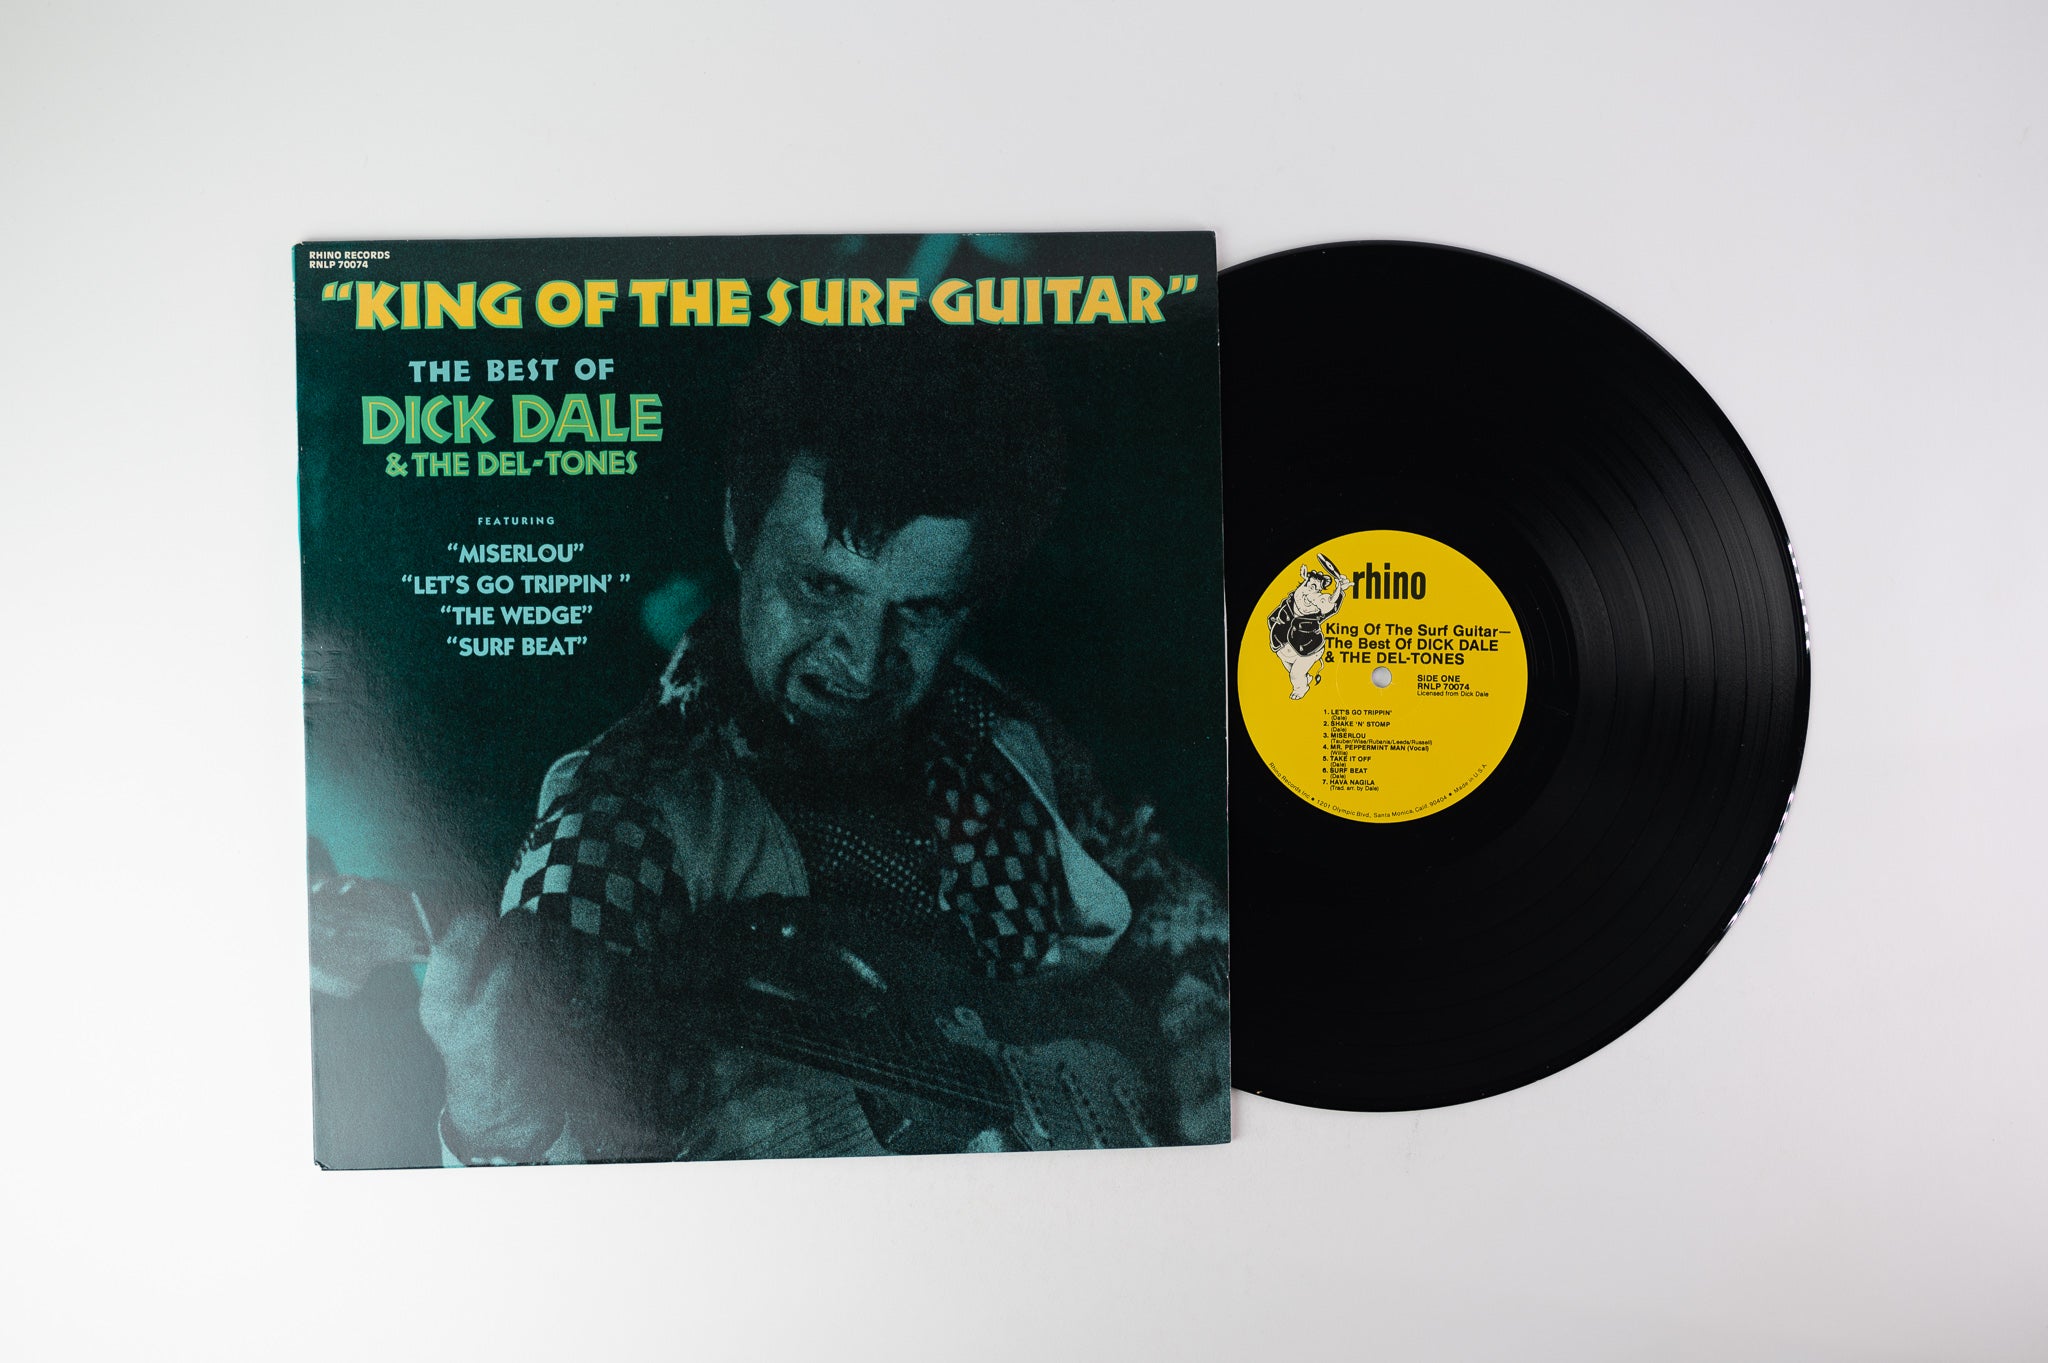 Dick Dale & His Del-Tones - King Of The Surf Guitar - The Best Of Dick Dale & The Del-Tones on Rhino